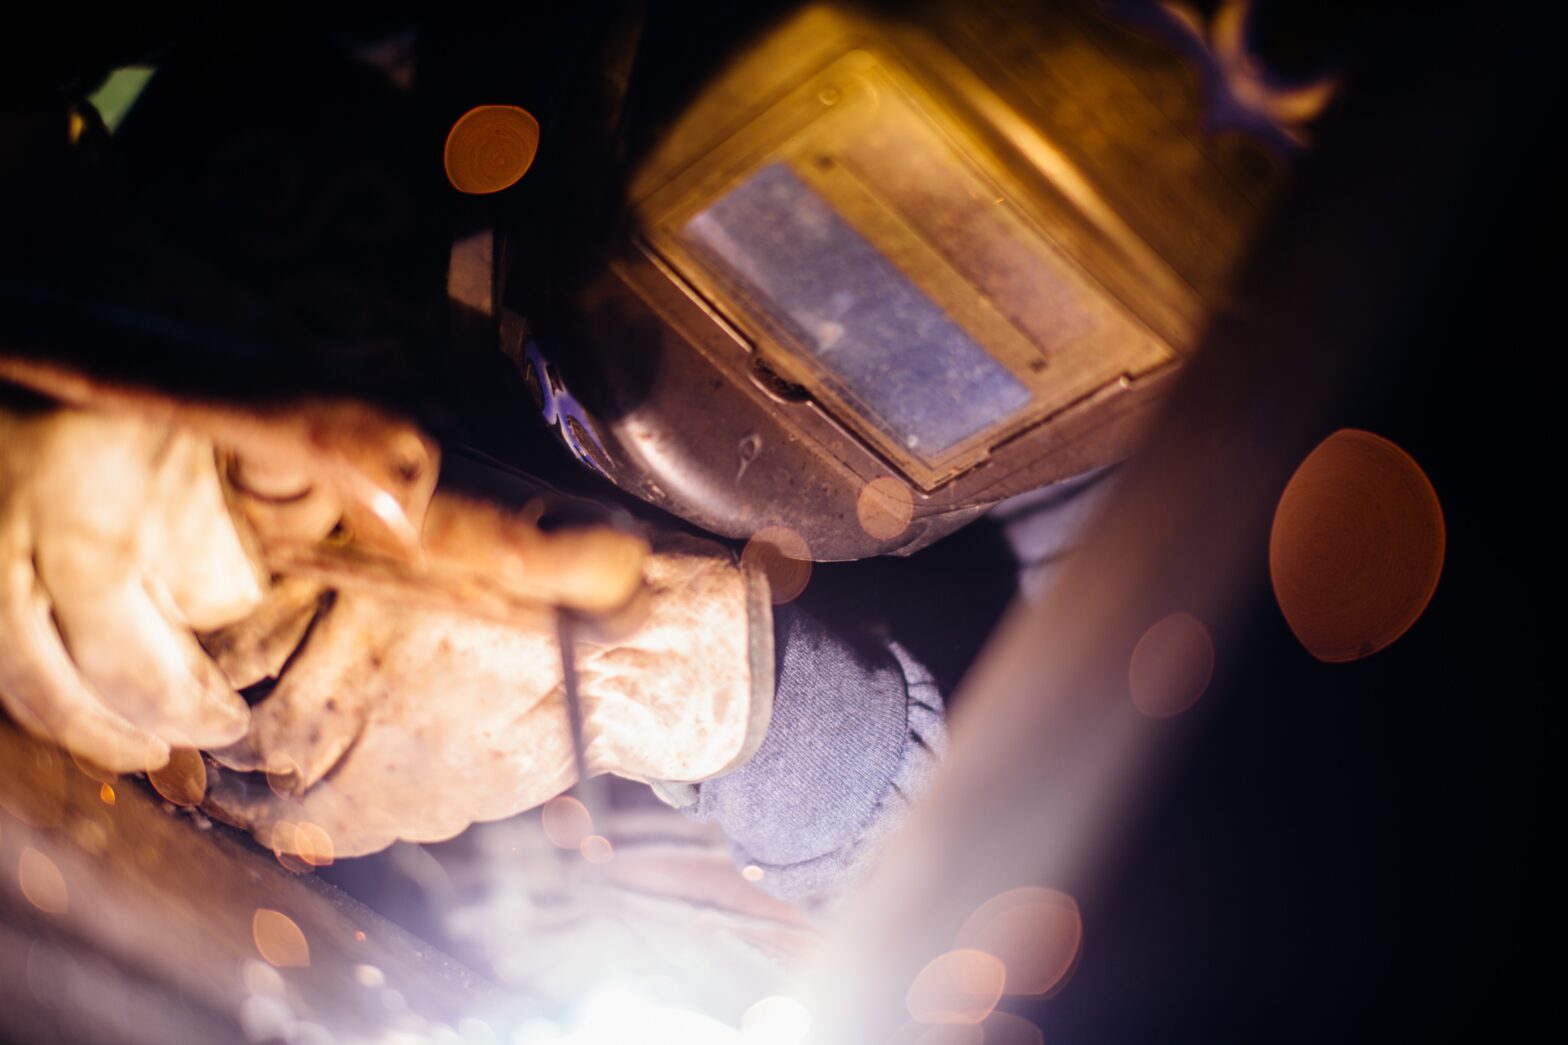 An image of a person wearing a welding helmet and gloves welding